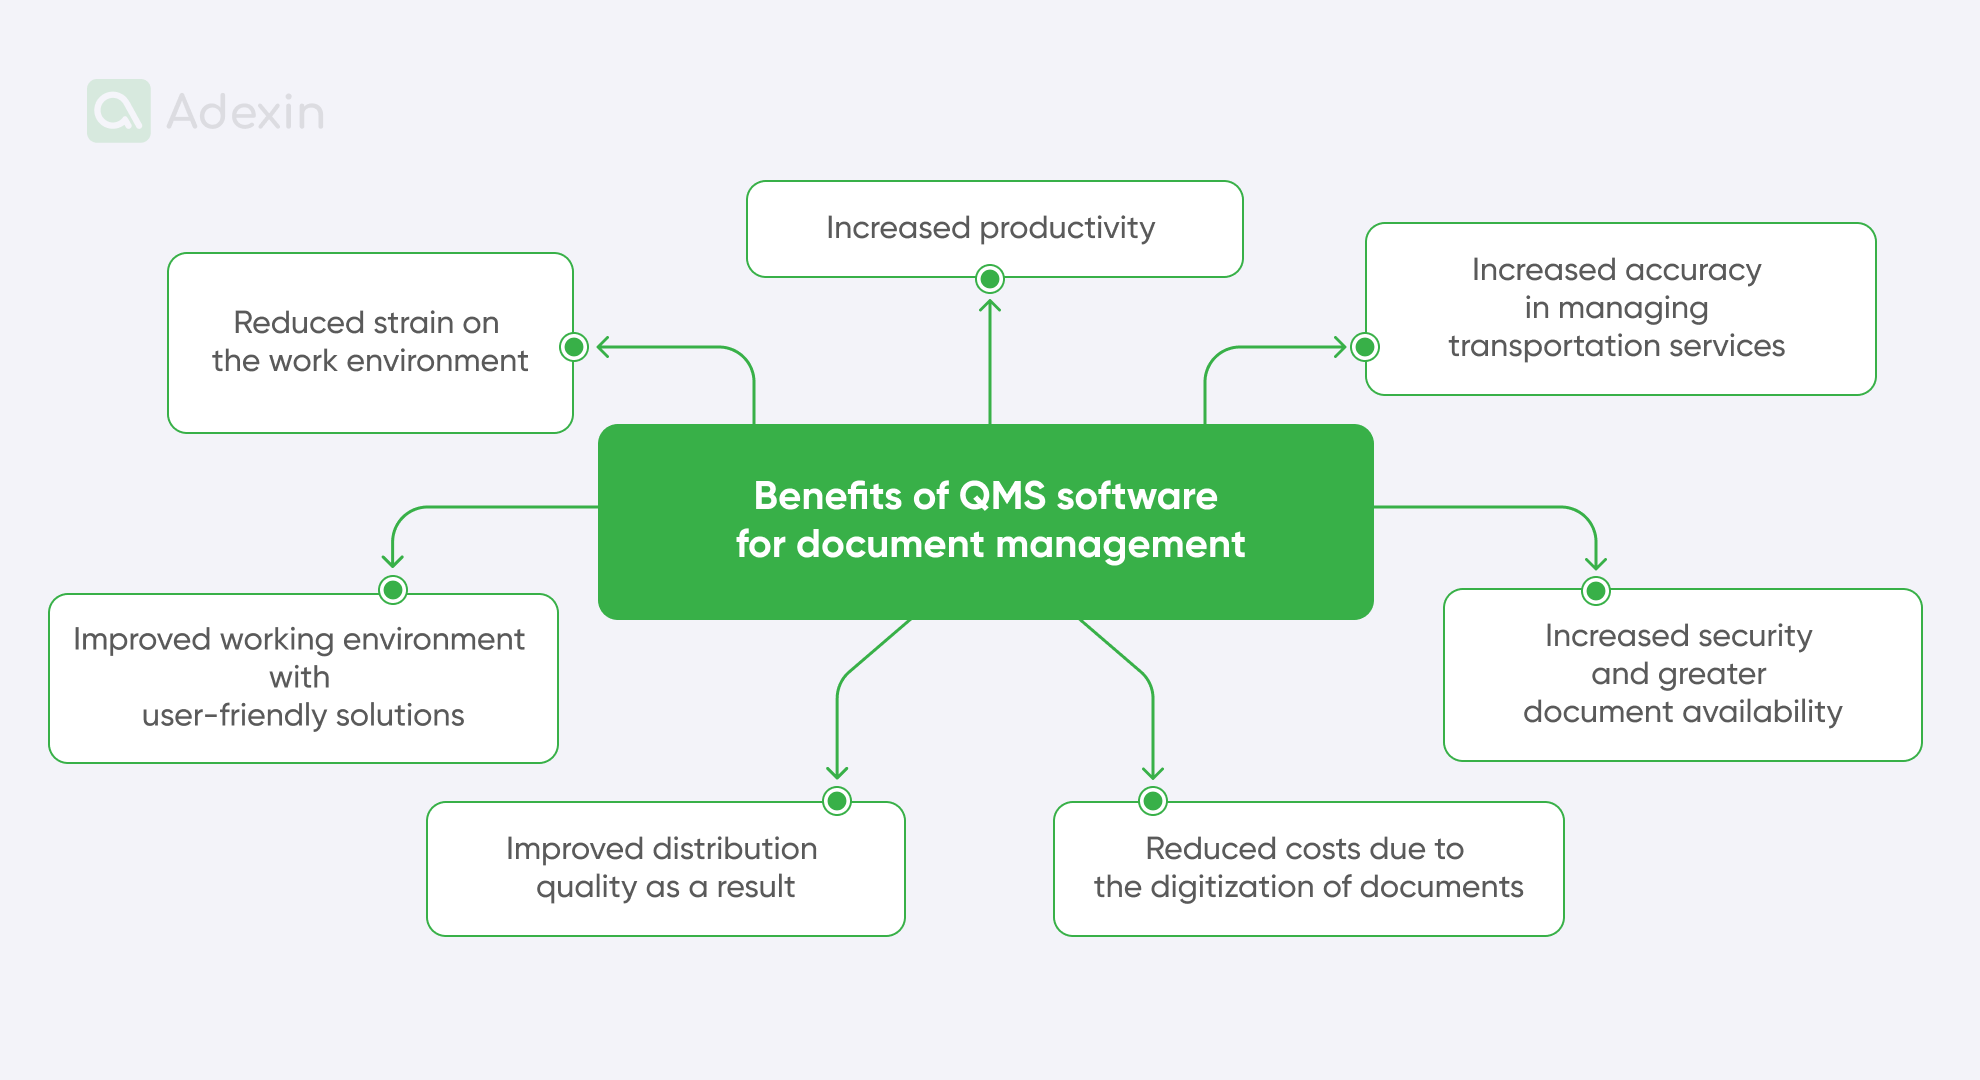 Elements of benefits of QMS software for document management